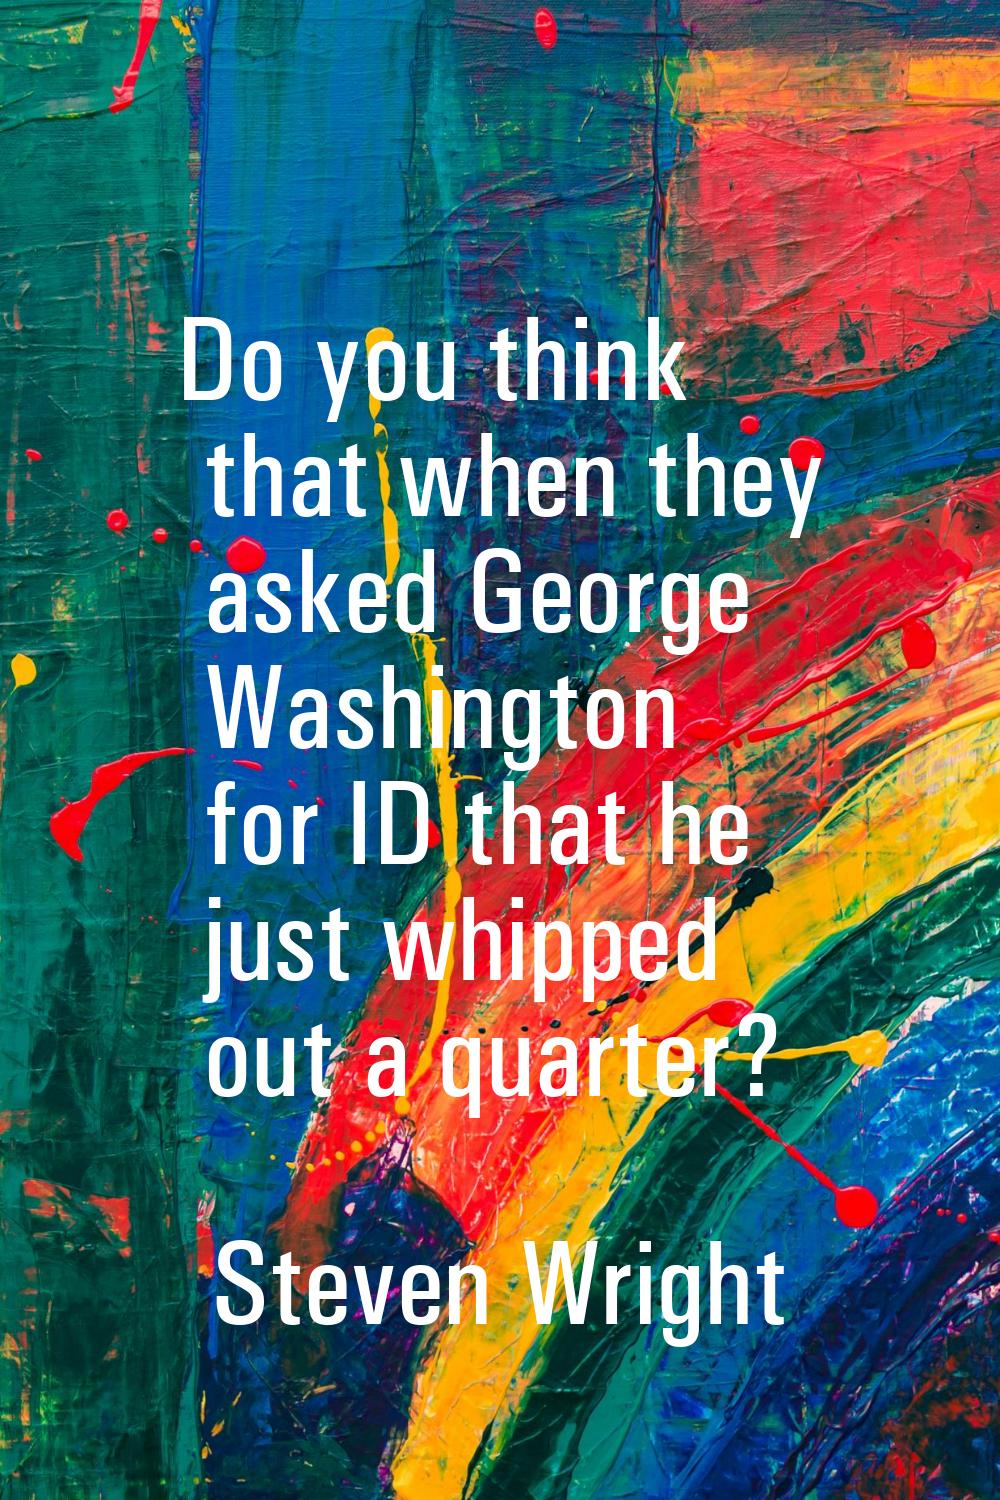 Do you think that when they asked George Washington for ID that he just whipped out a quarter?